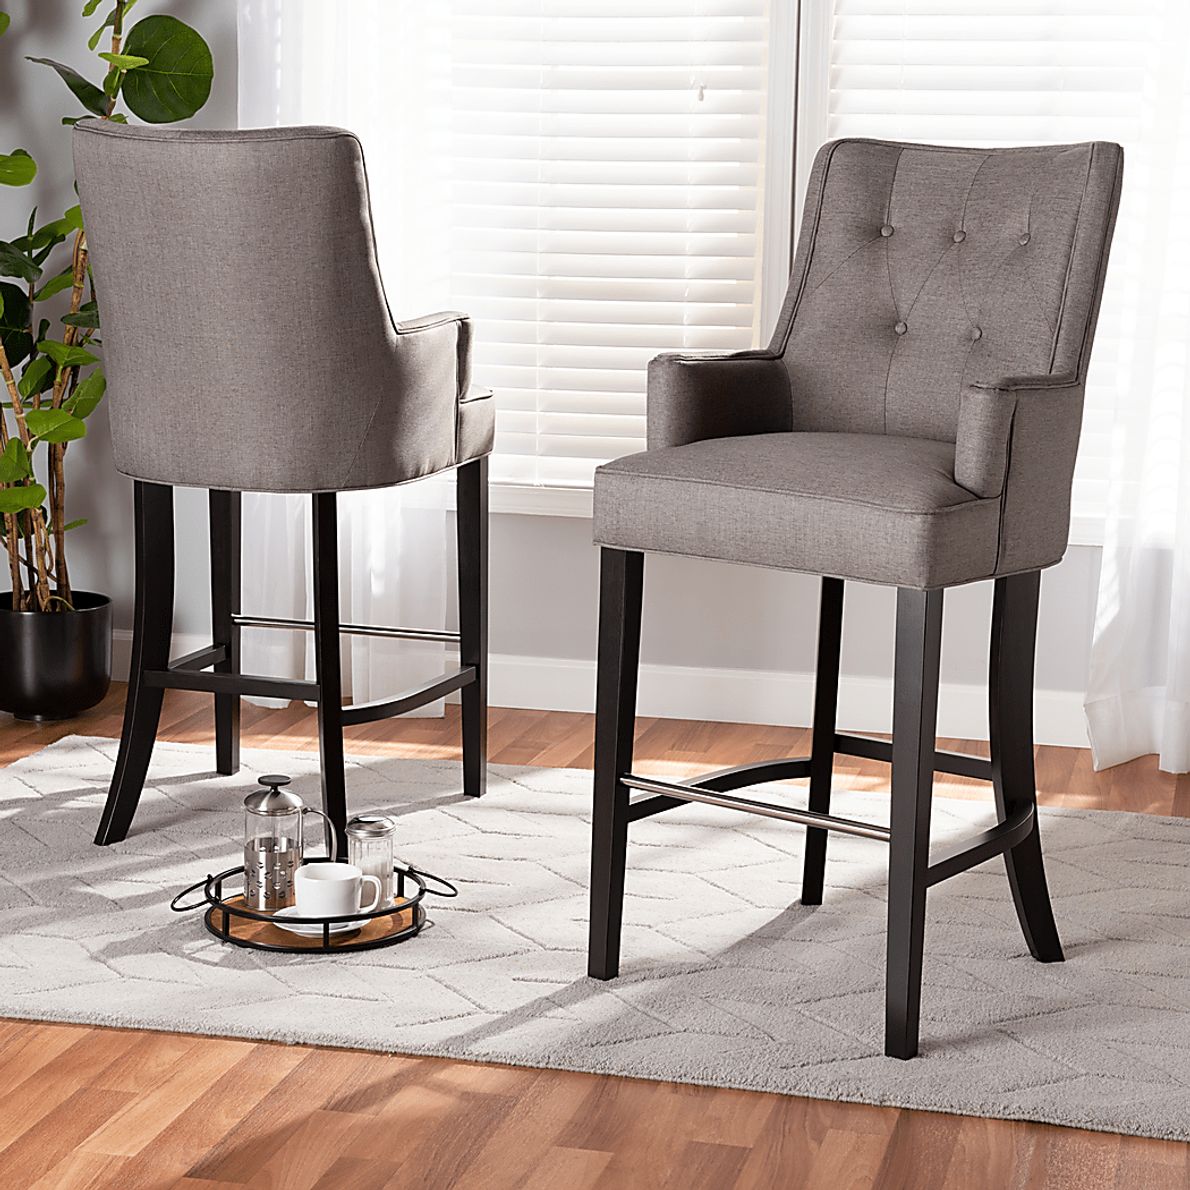 Chalfant Gray Barstool, Set of 2 - Rooms To Go